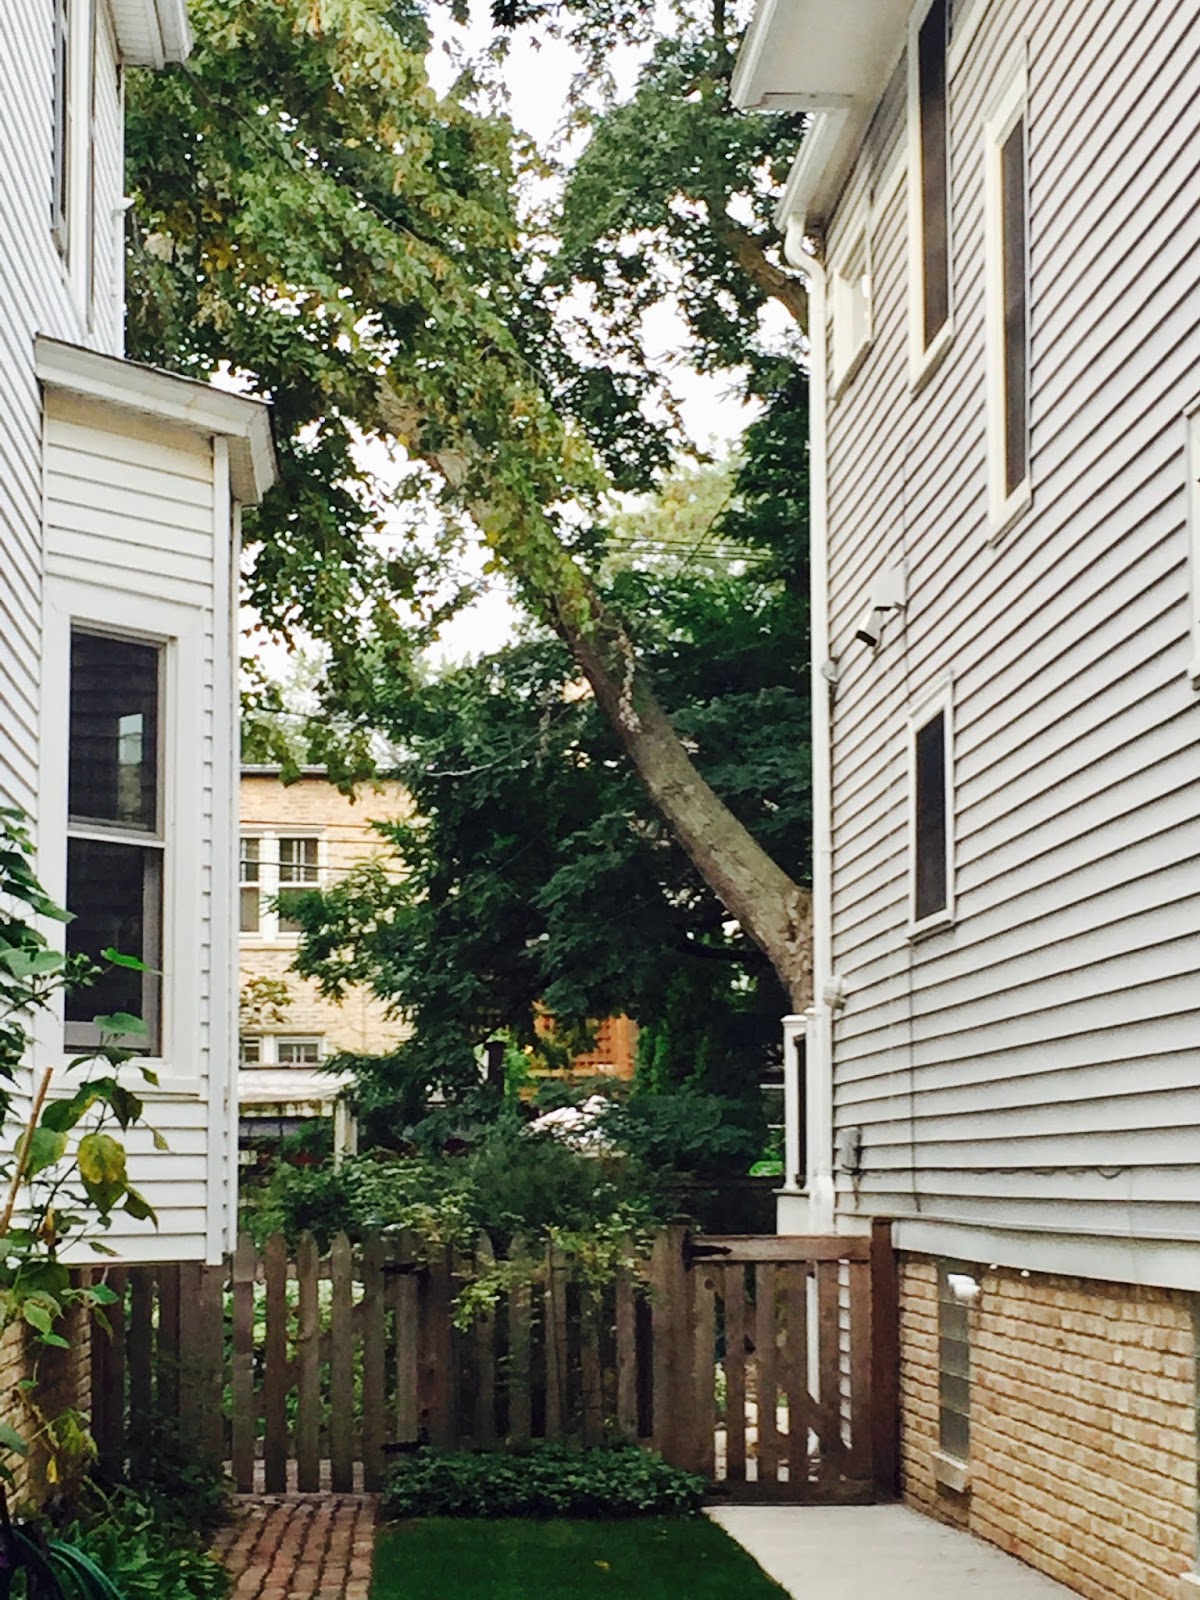 Help! My neighbor’s old tree is growing over my roof